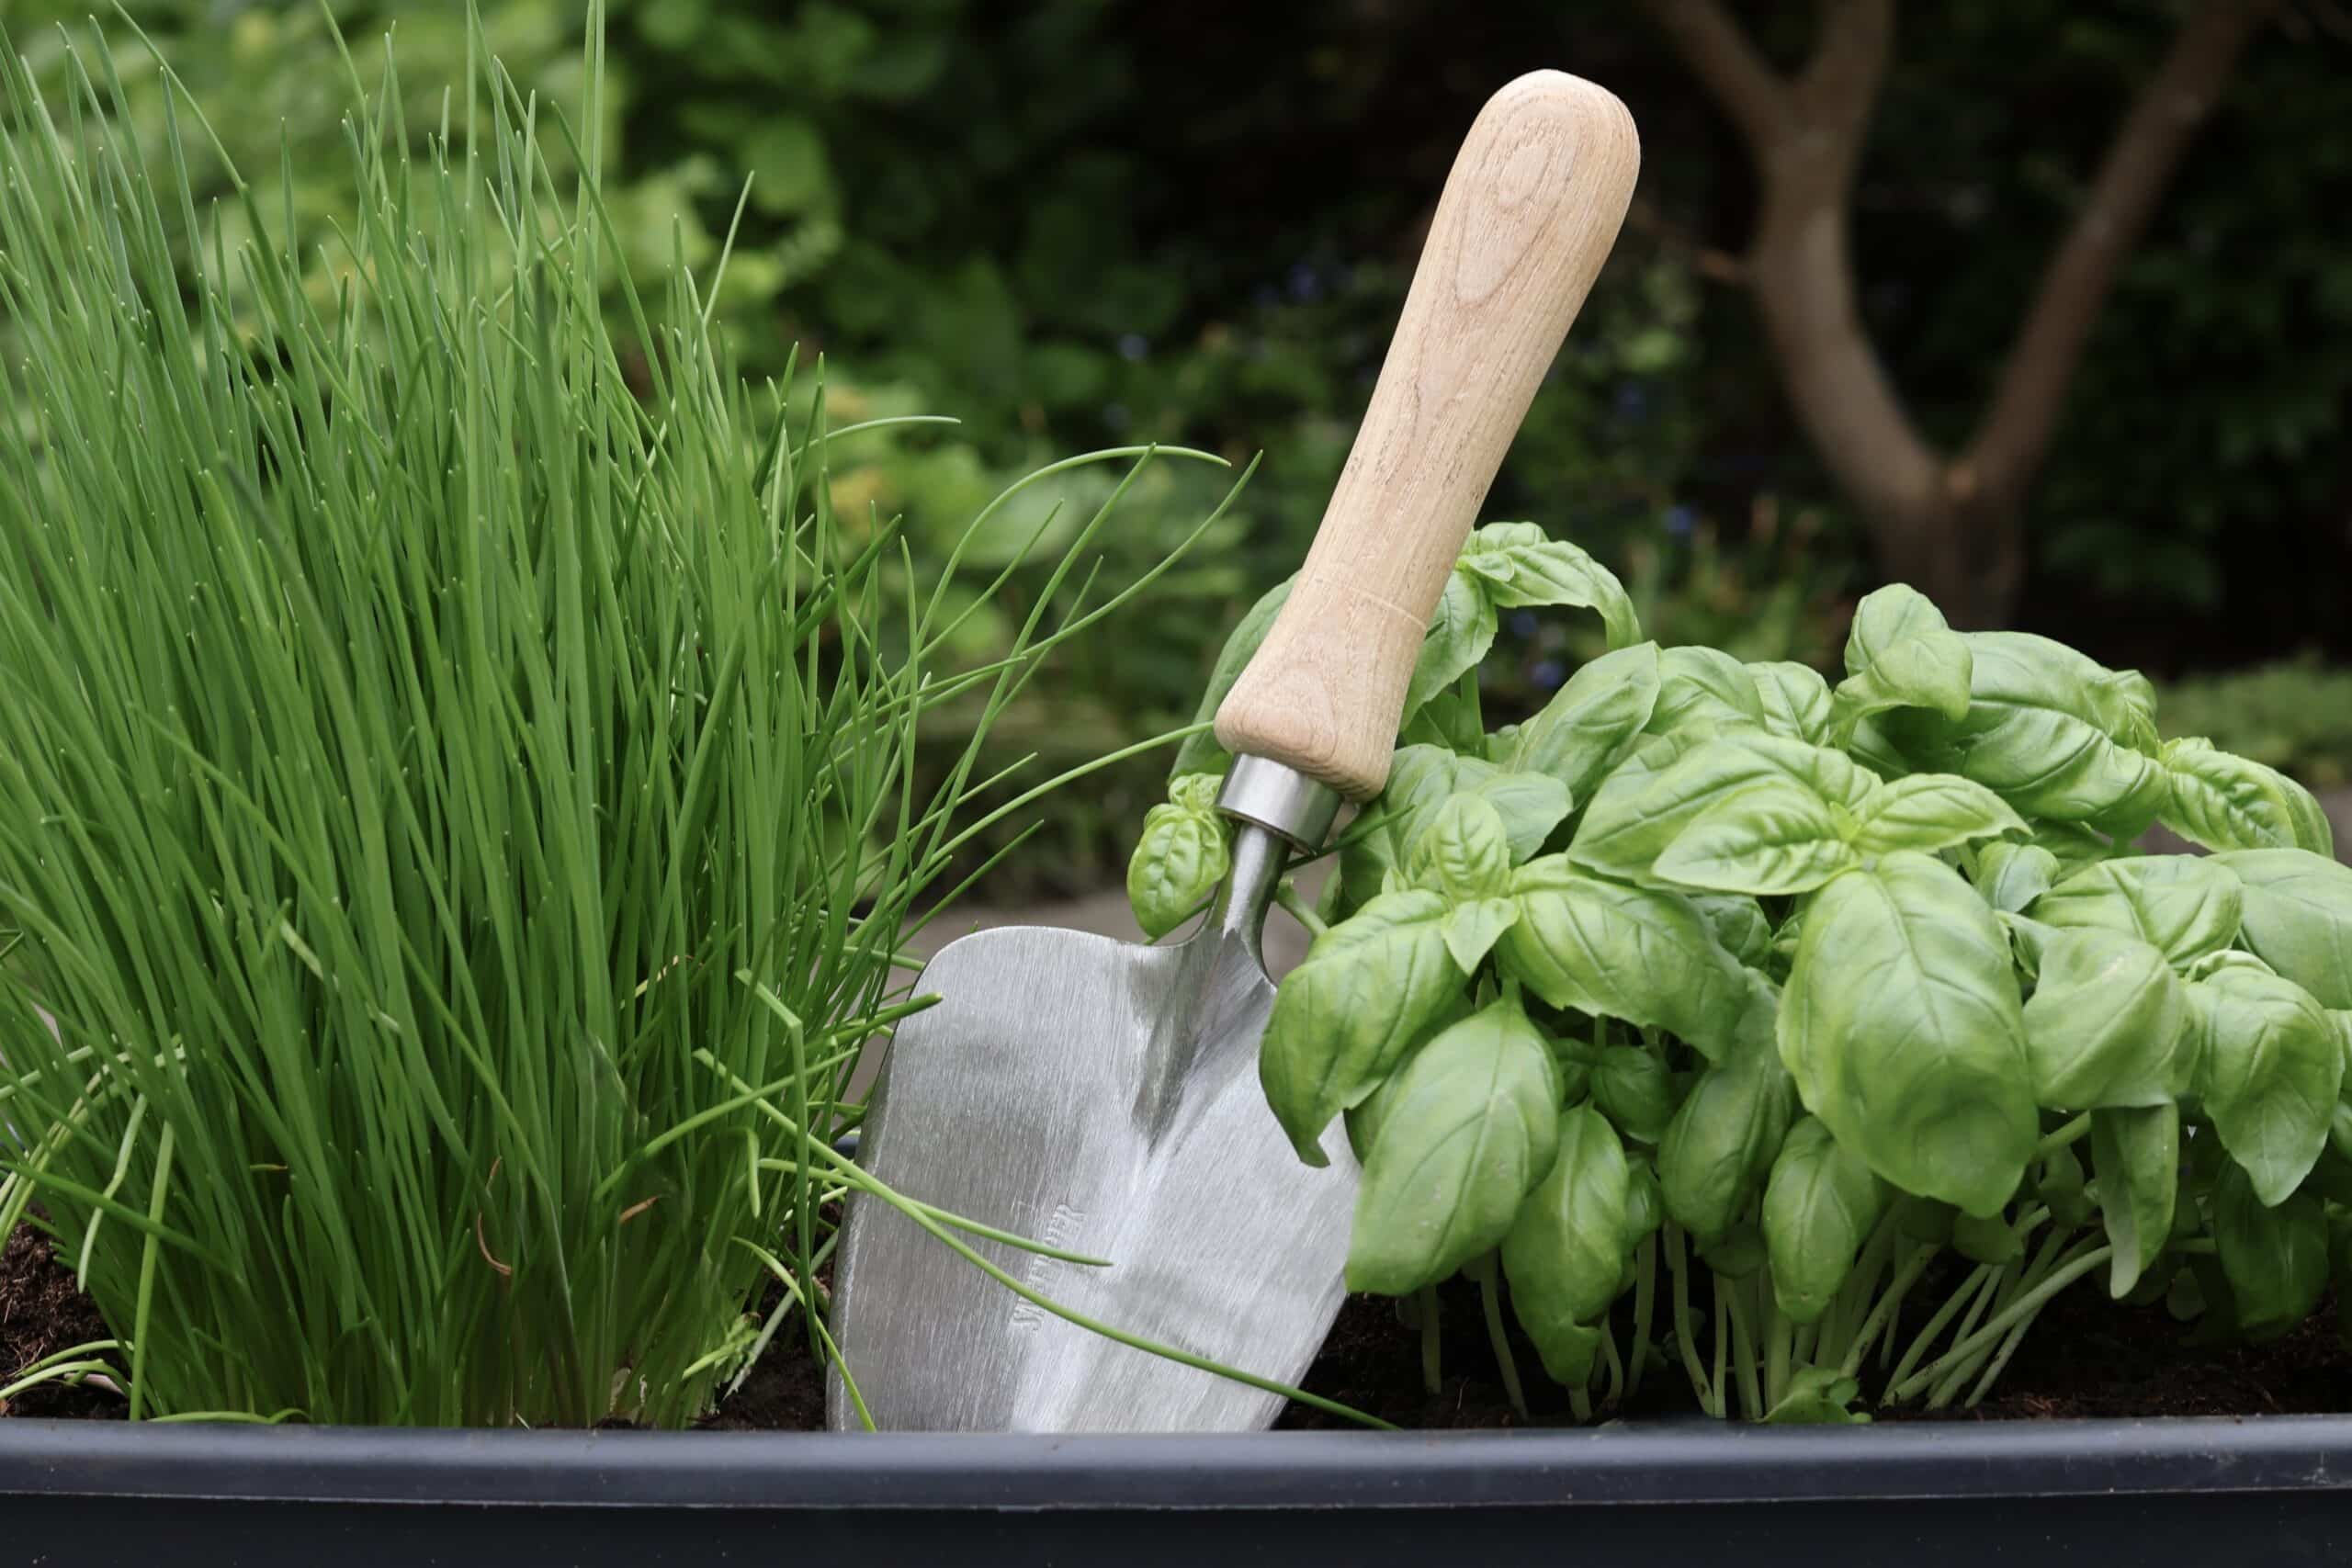 Tips for gardening in May